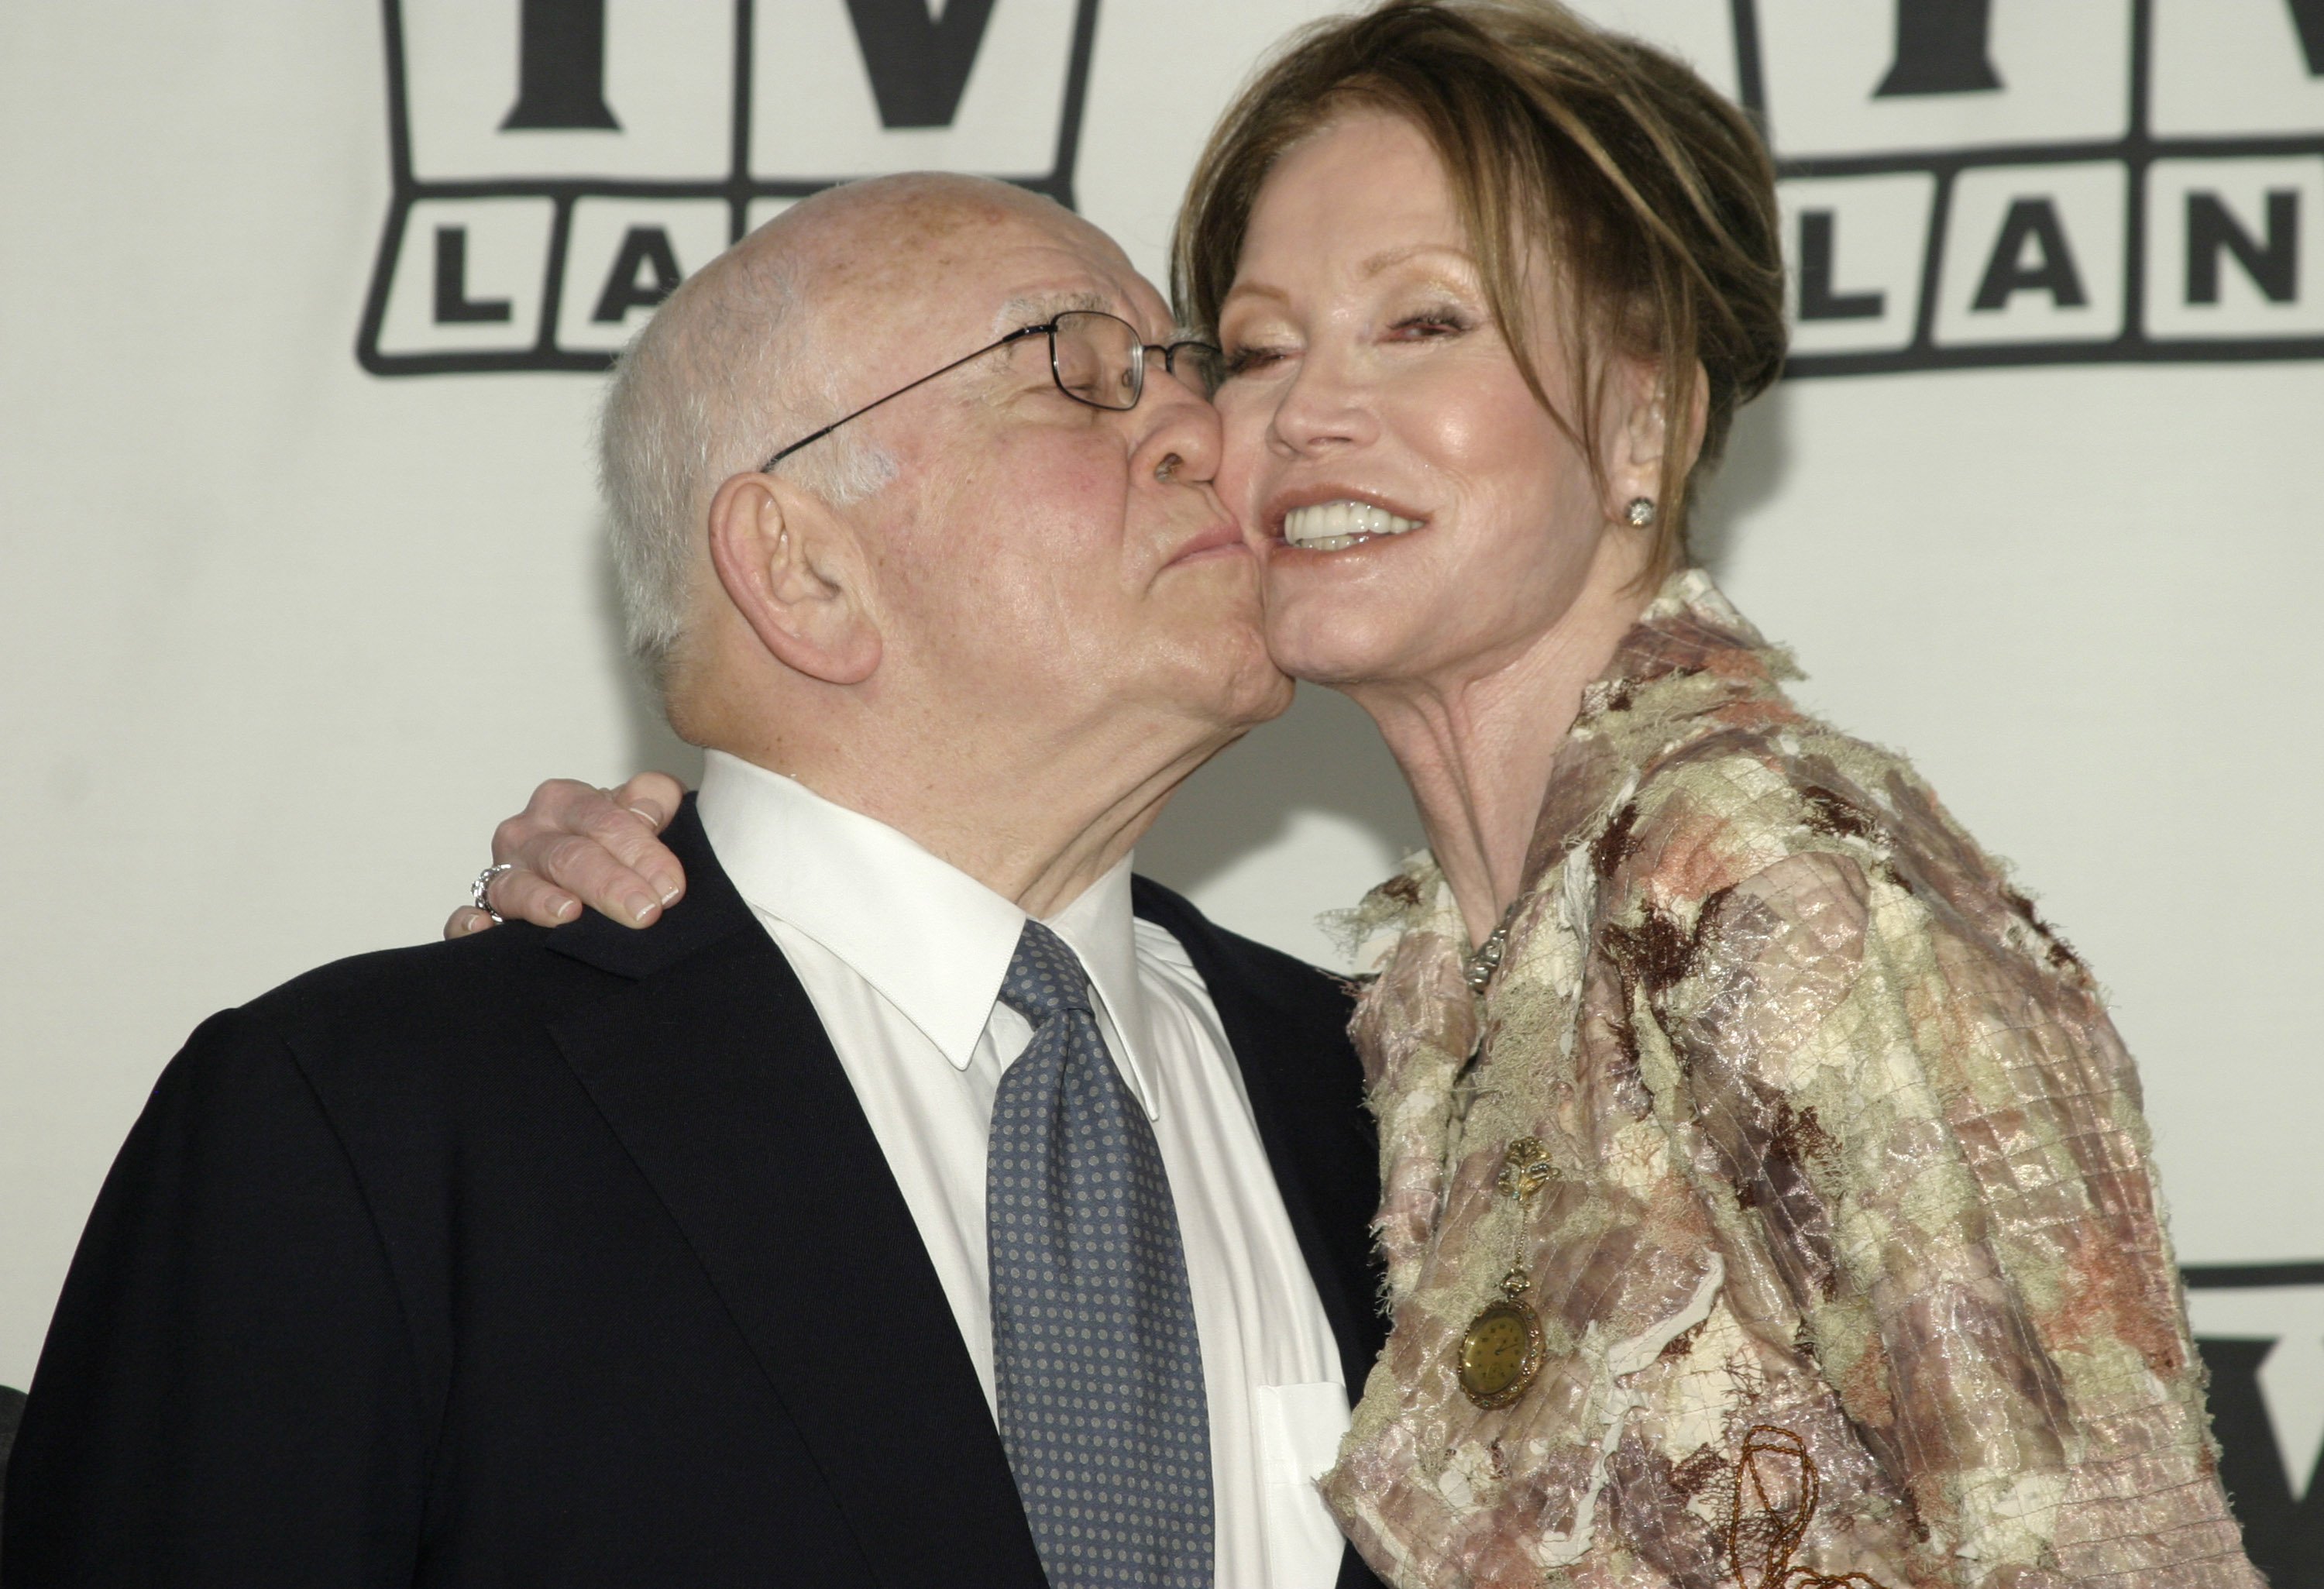 Ed Asner and Mary Tyler Moore pictured at the 2004 TV Land Awards, Hollywood, California. | Photo: Getty Images